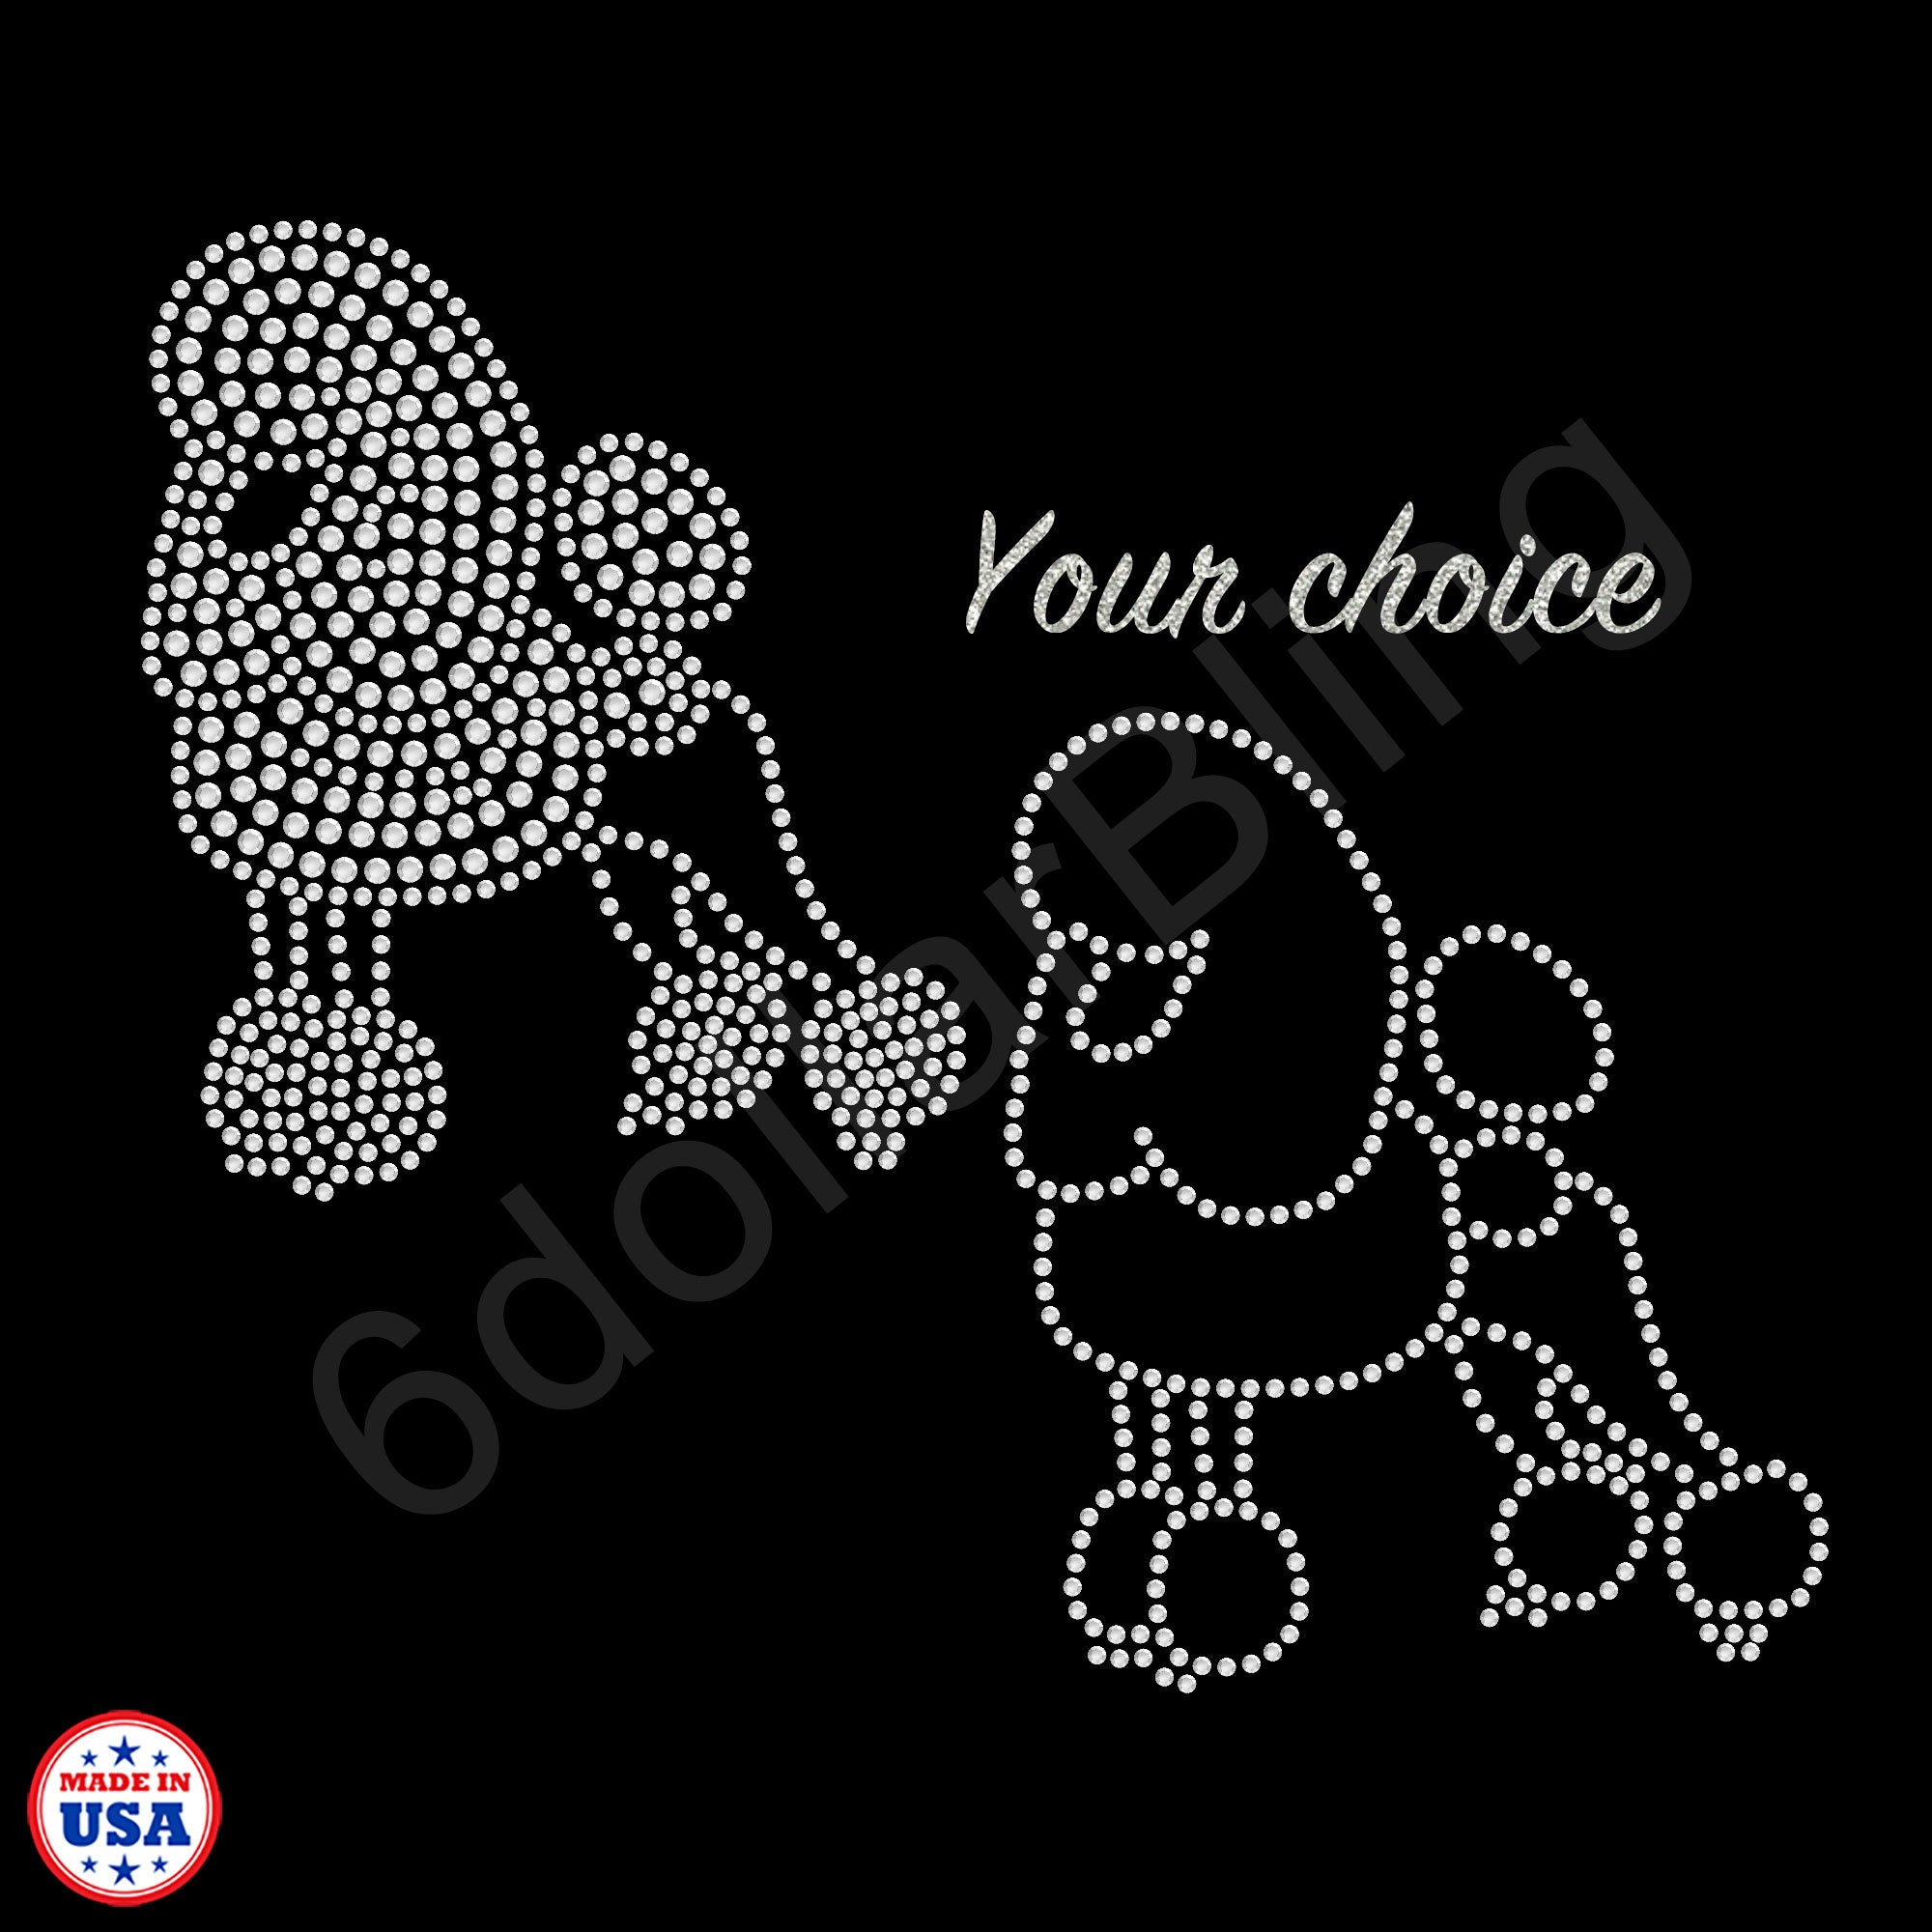 Small Stars Rhinestone Iron-on Crystal Various Bling Hotfix Sparkle  Transfer Applique Make Your Own Star Cheer Bows, Mask, Shirt DIY 